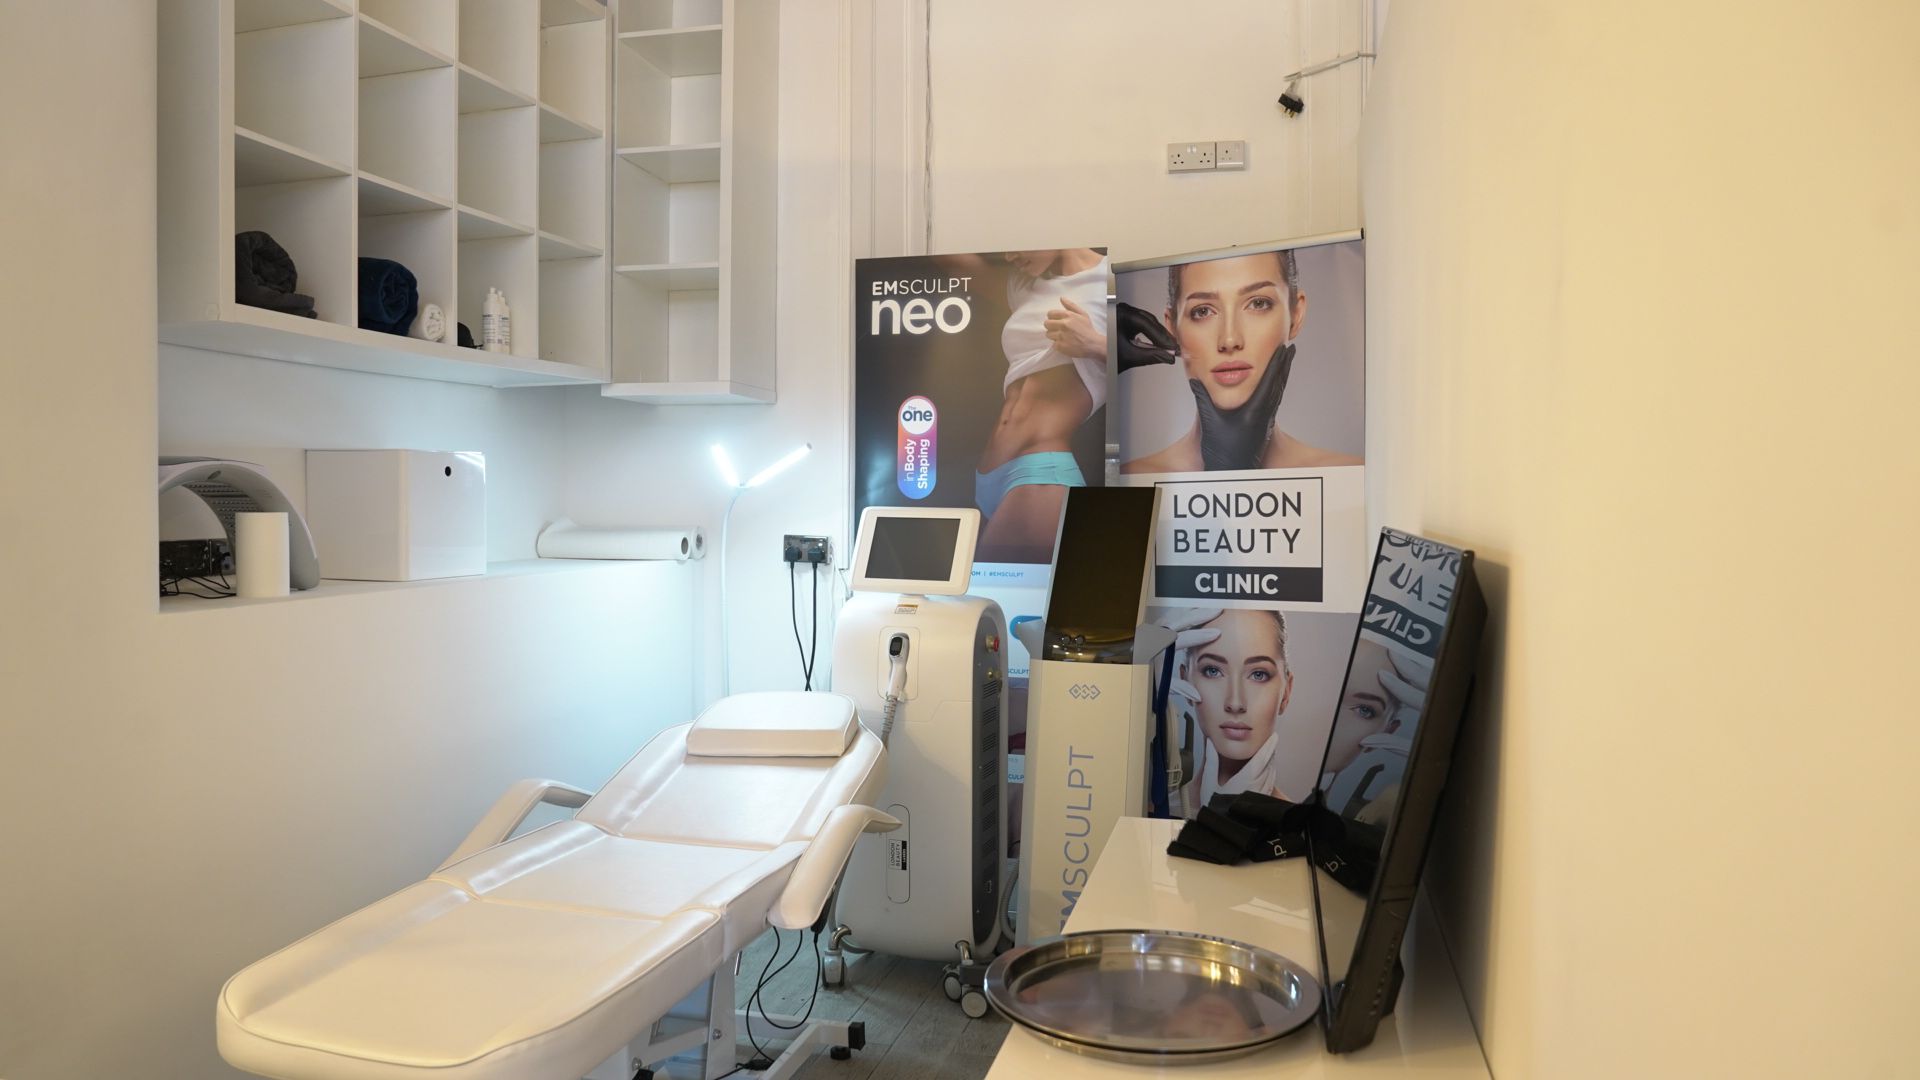 london-beauty-clinic-images (13)